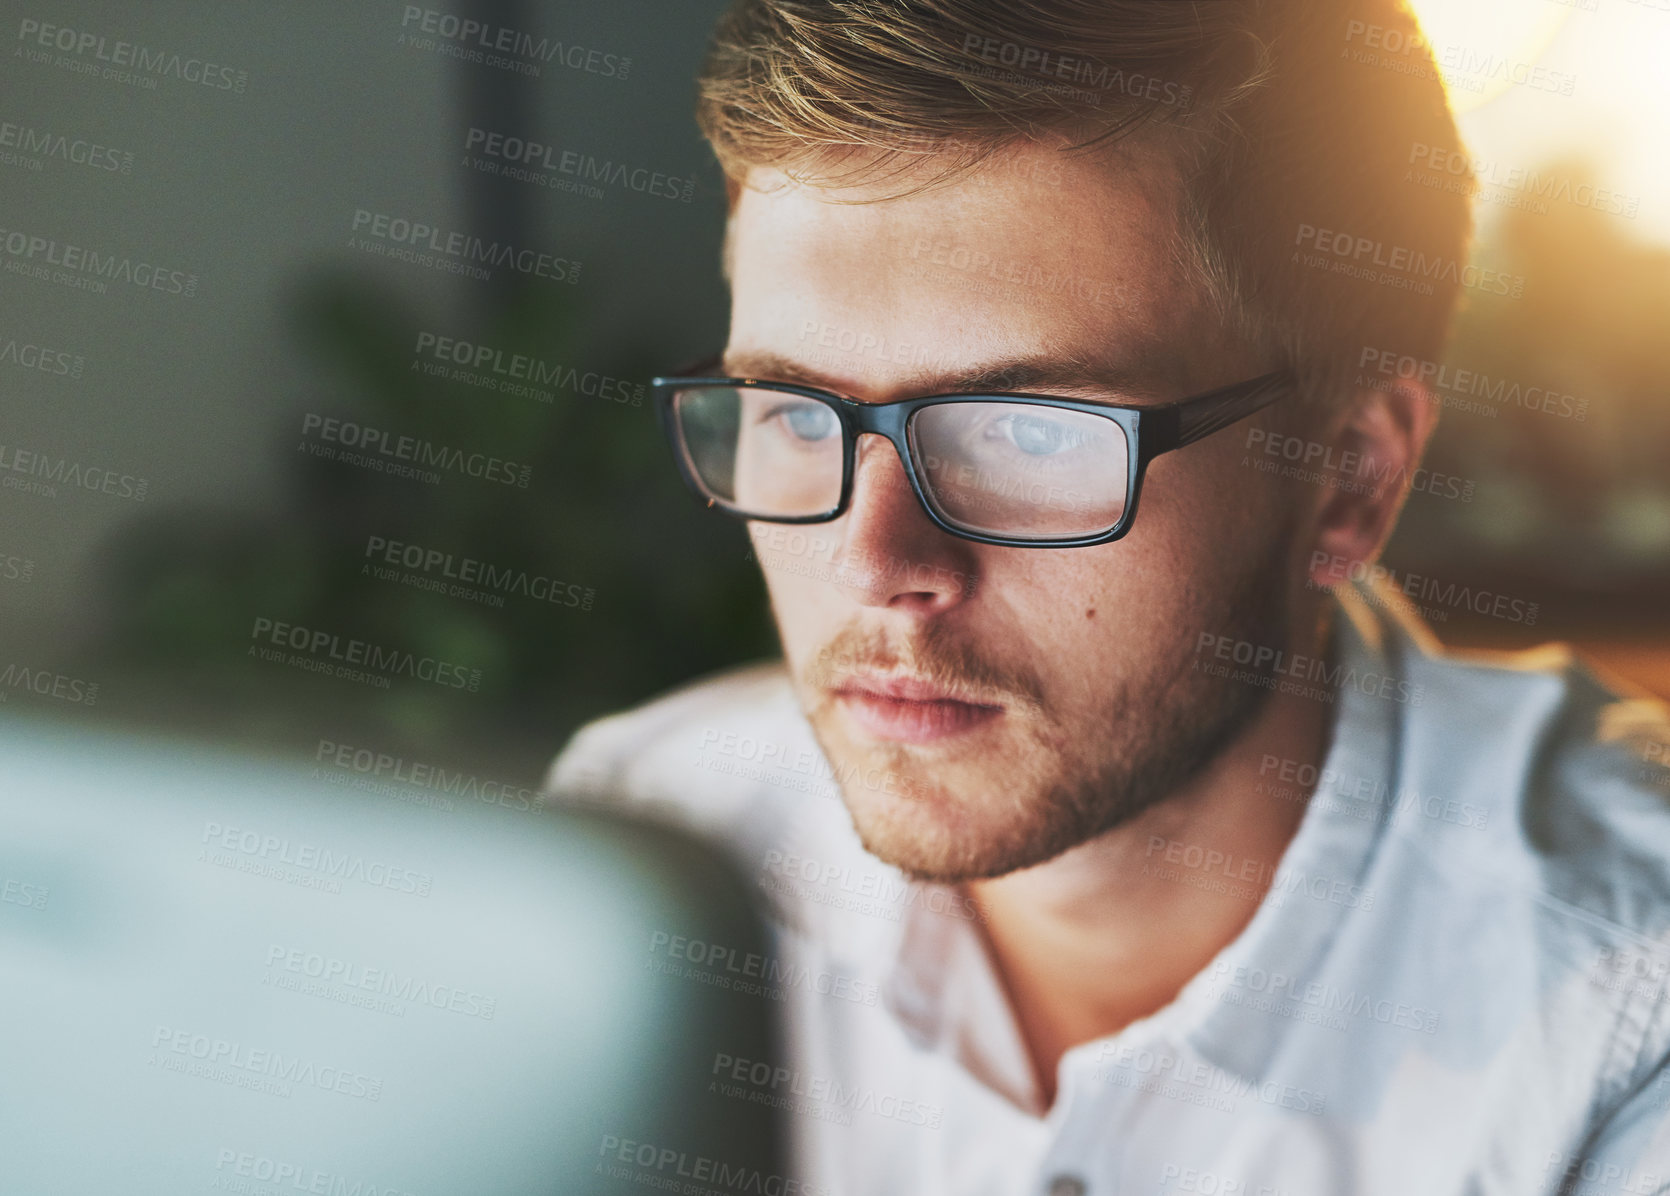 Buy stock photo Shot of a young designer working on a computer while wearing glasses in the office